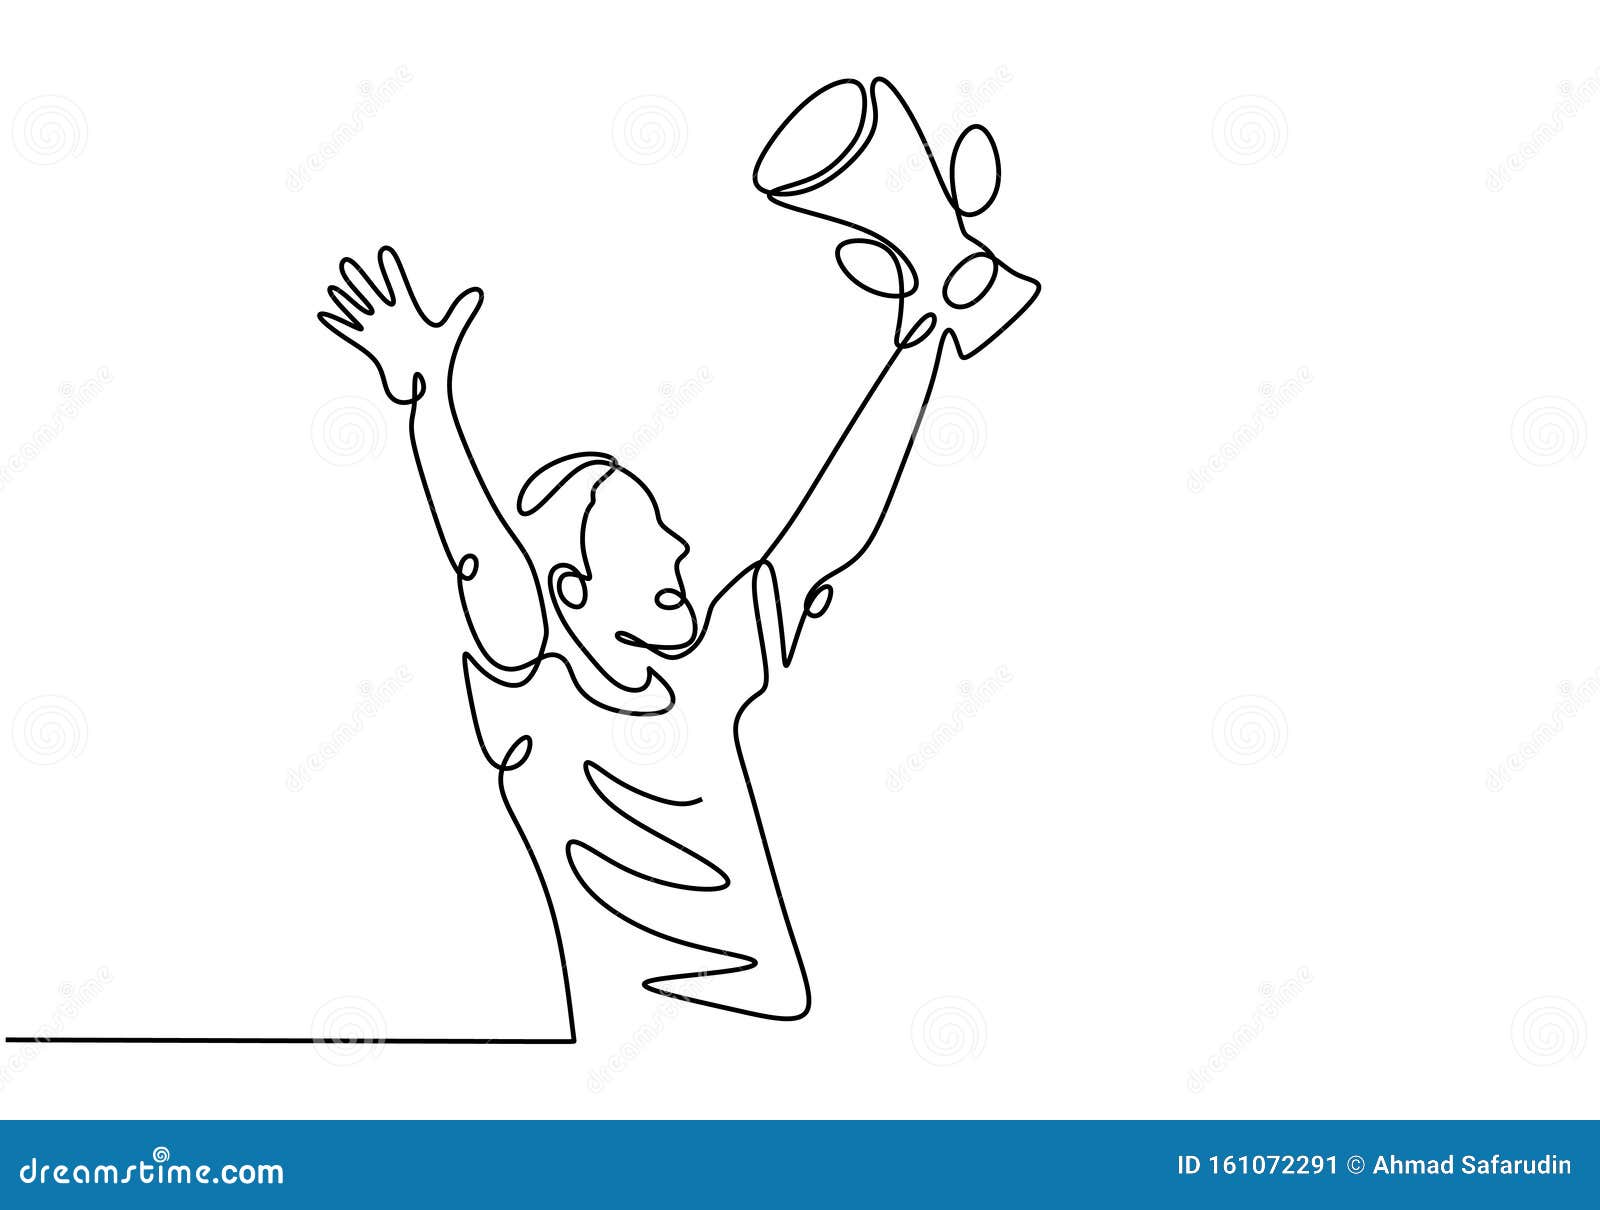 Forkæl dig stout Håndbog Continuous Line Drawing of Winner Holding and Raising Champion Trophy.  Vector Illustration Single Hand Drawn Style Stock Vector - Illustration of  competition, celebration: 161072291